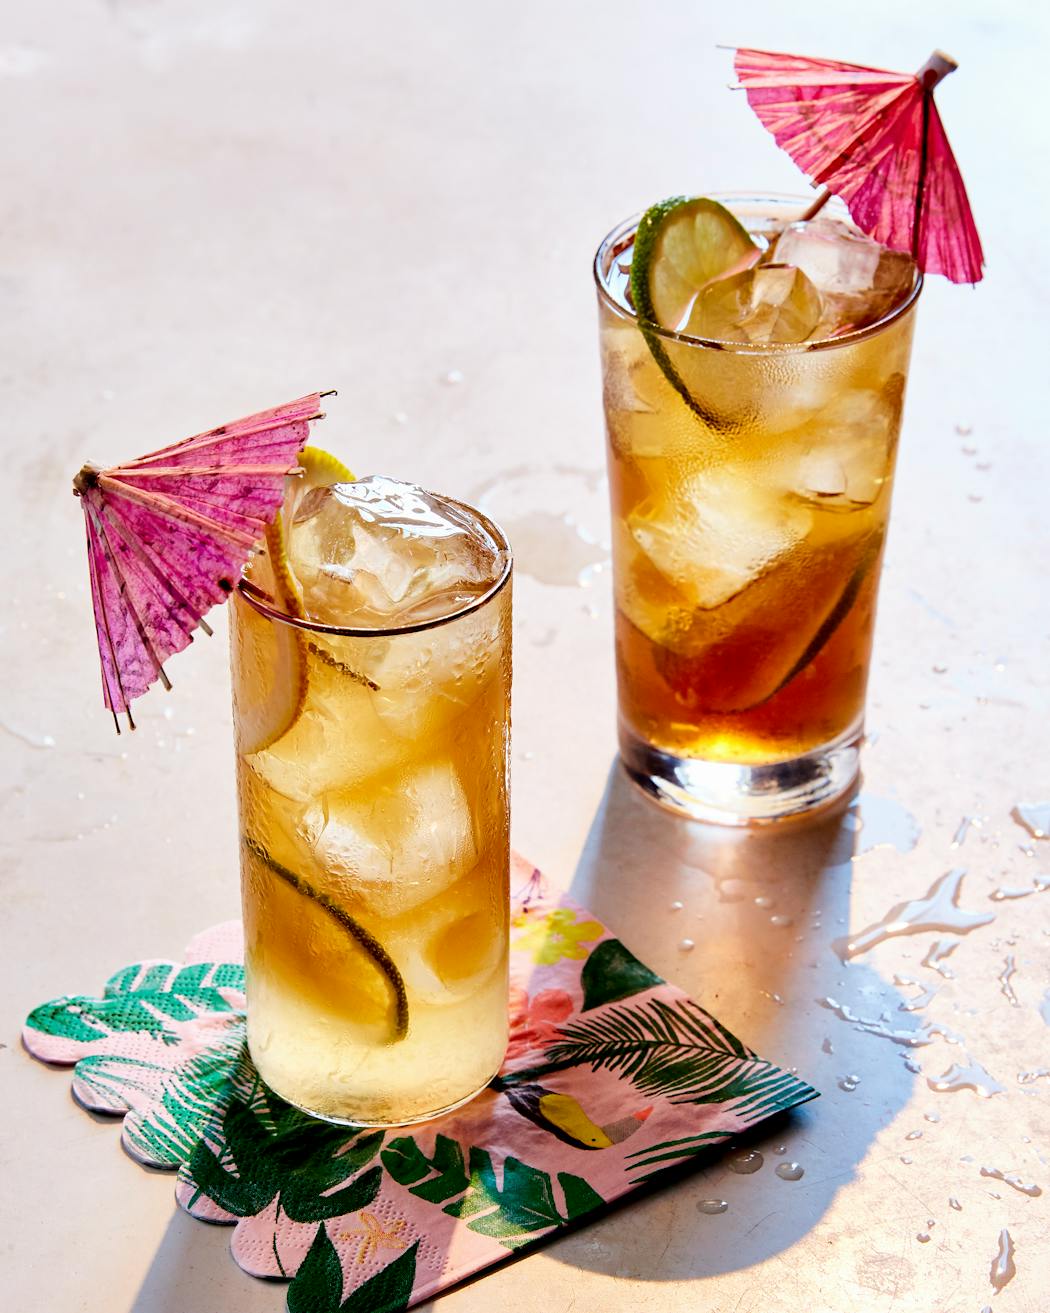 Party like it’s 1985, with drinks such as the Long Island iced tea.